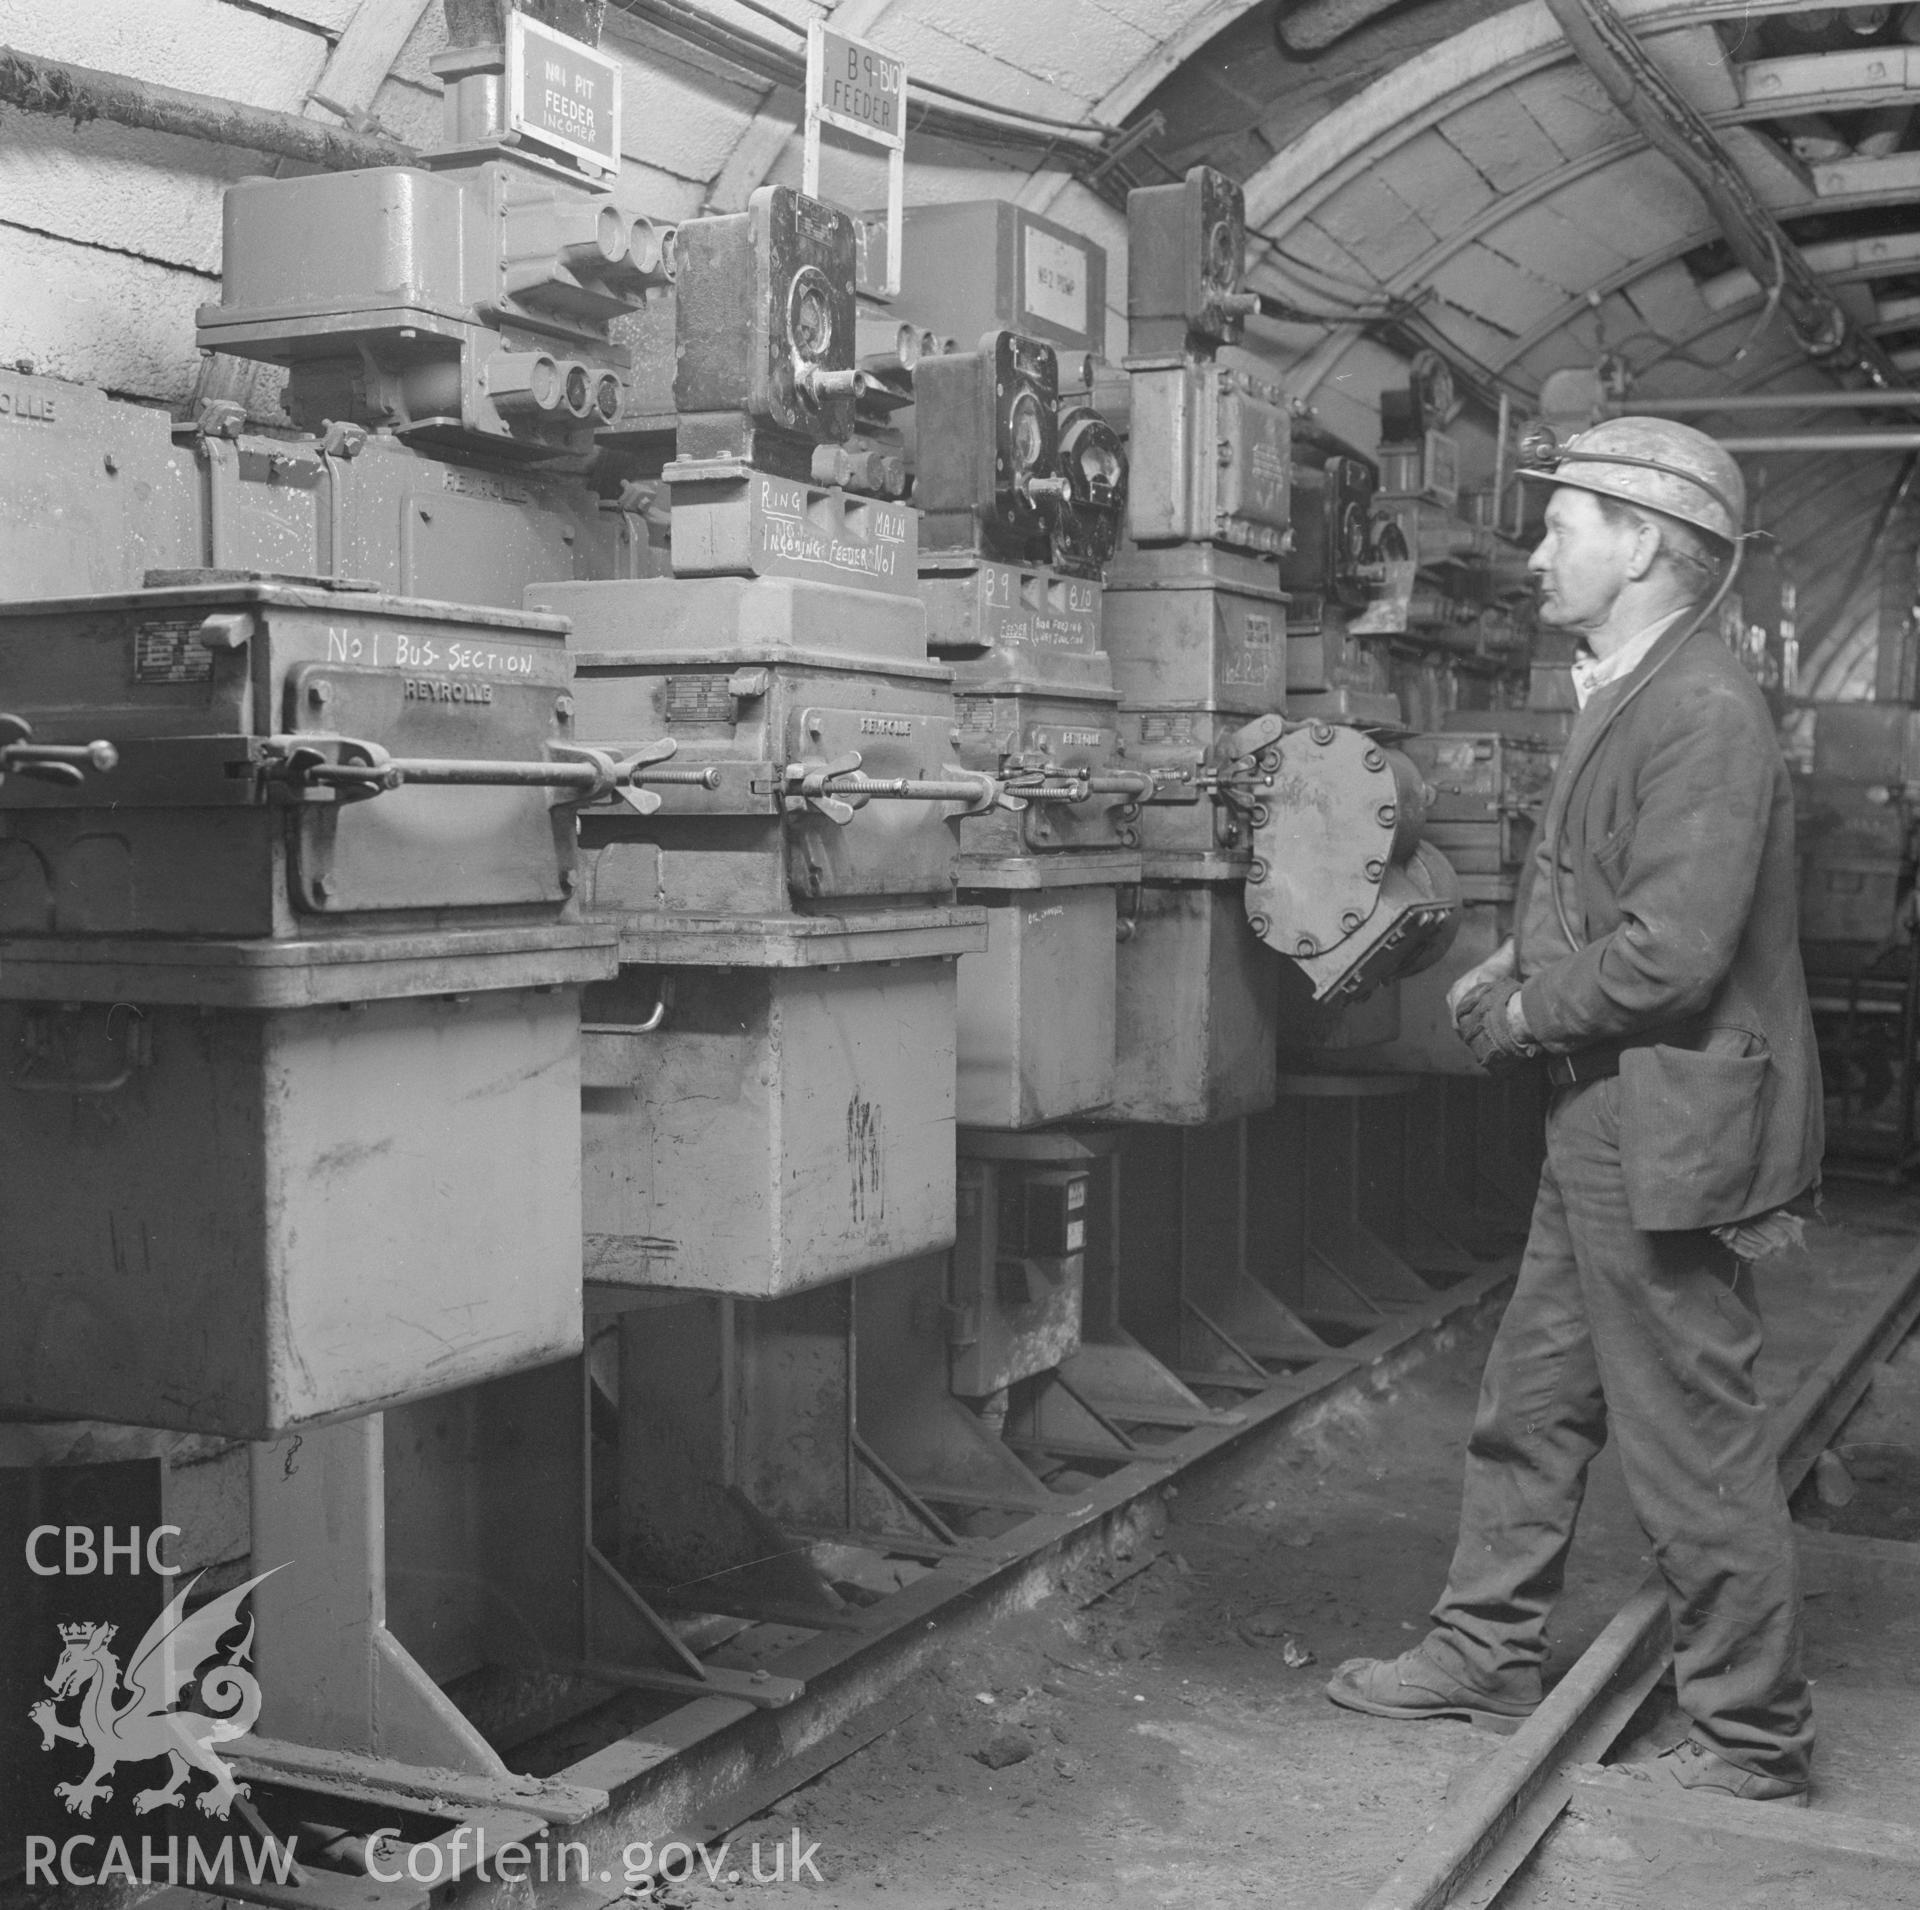 Digital copy of an acetate negative showing electrician and transformers in a sub station for a district at Taff Colliery, from the John Cornwell Collection.